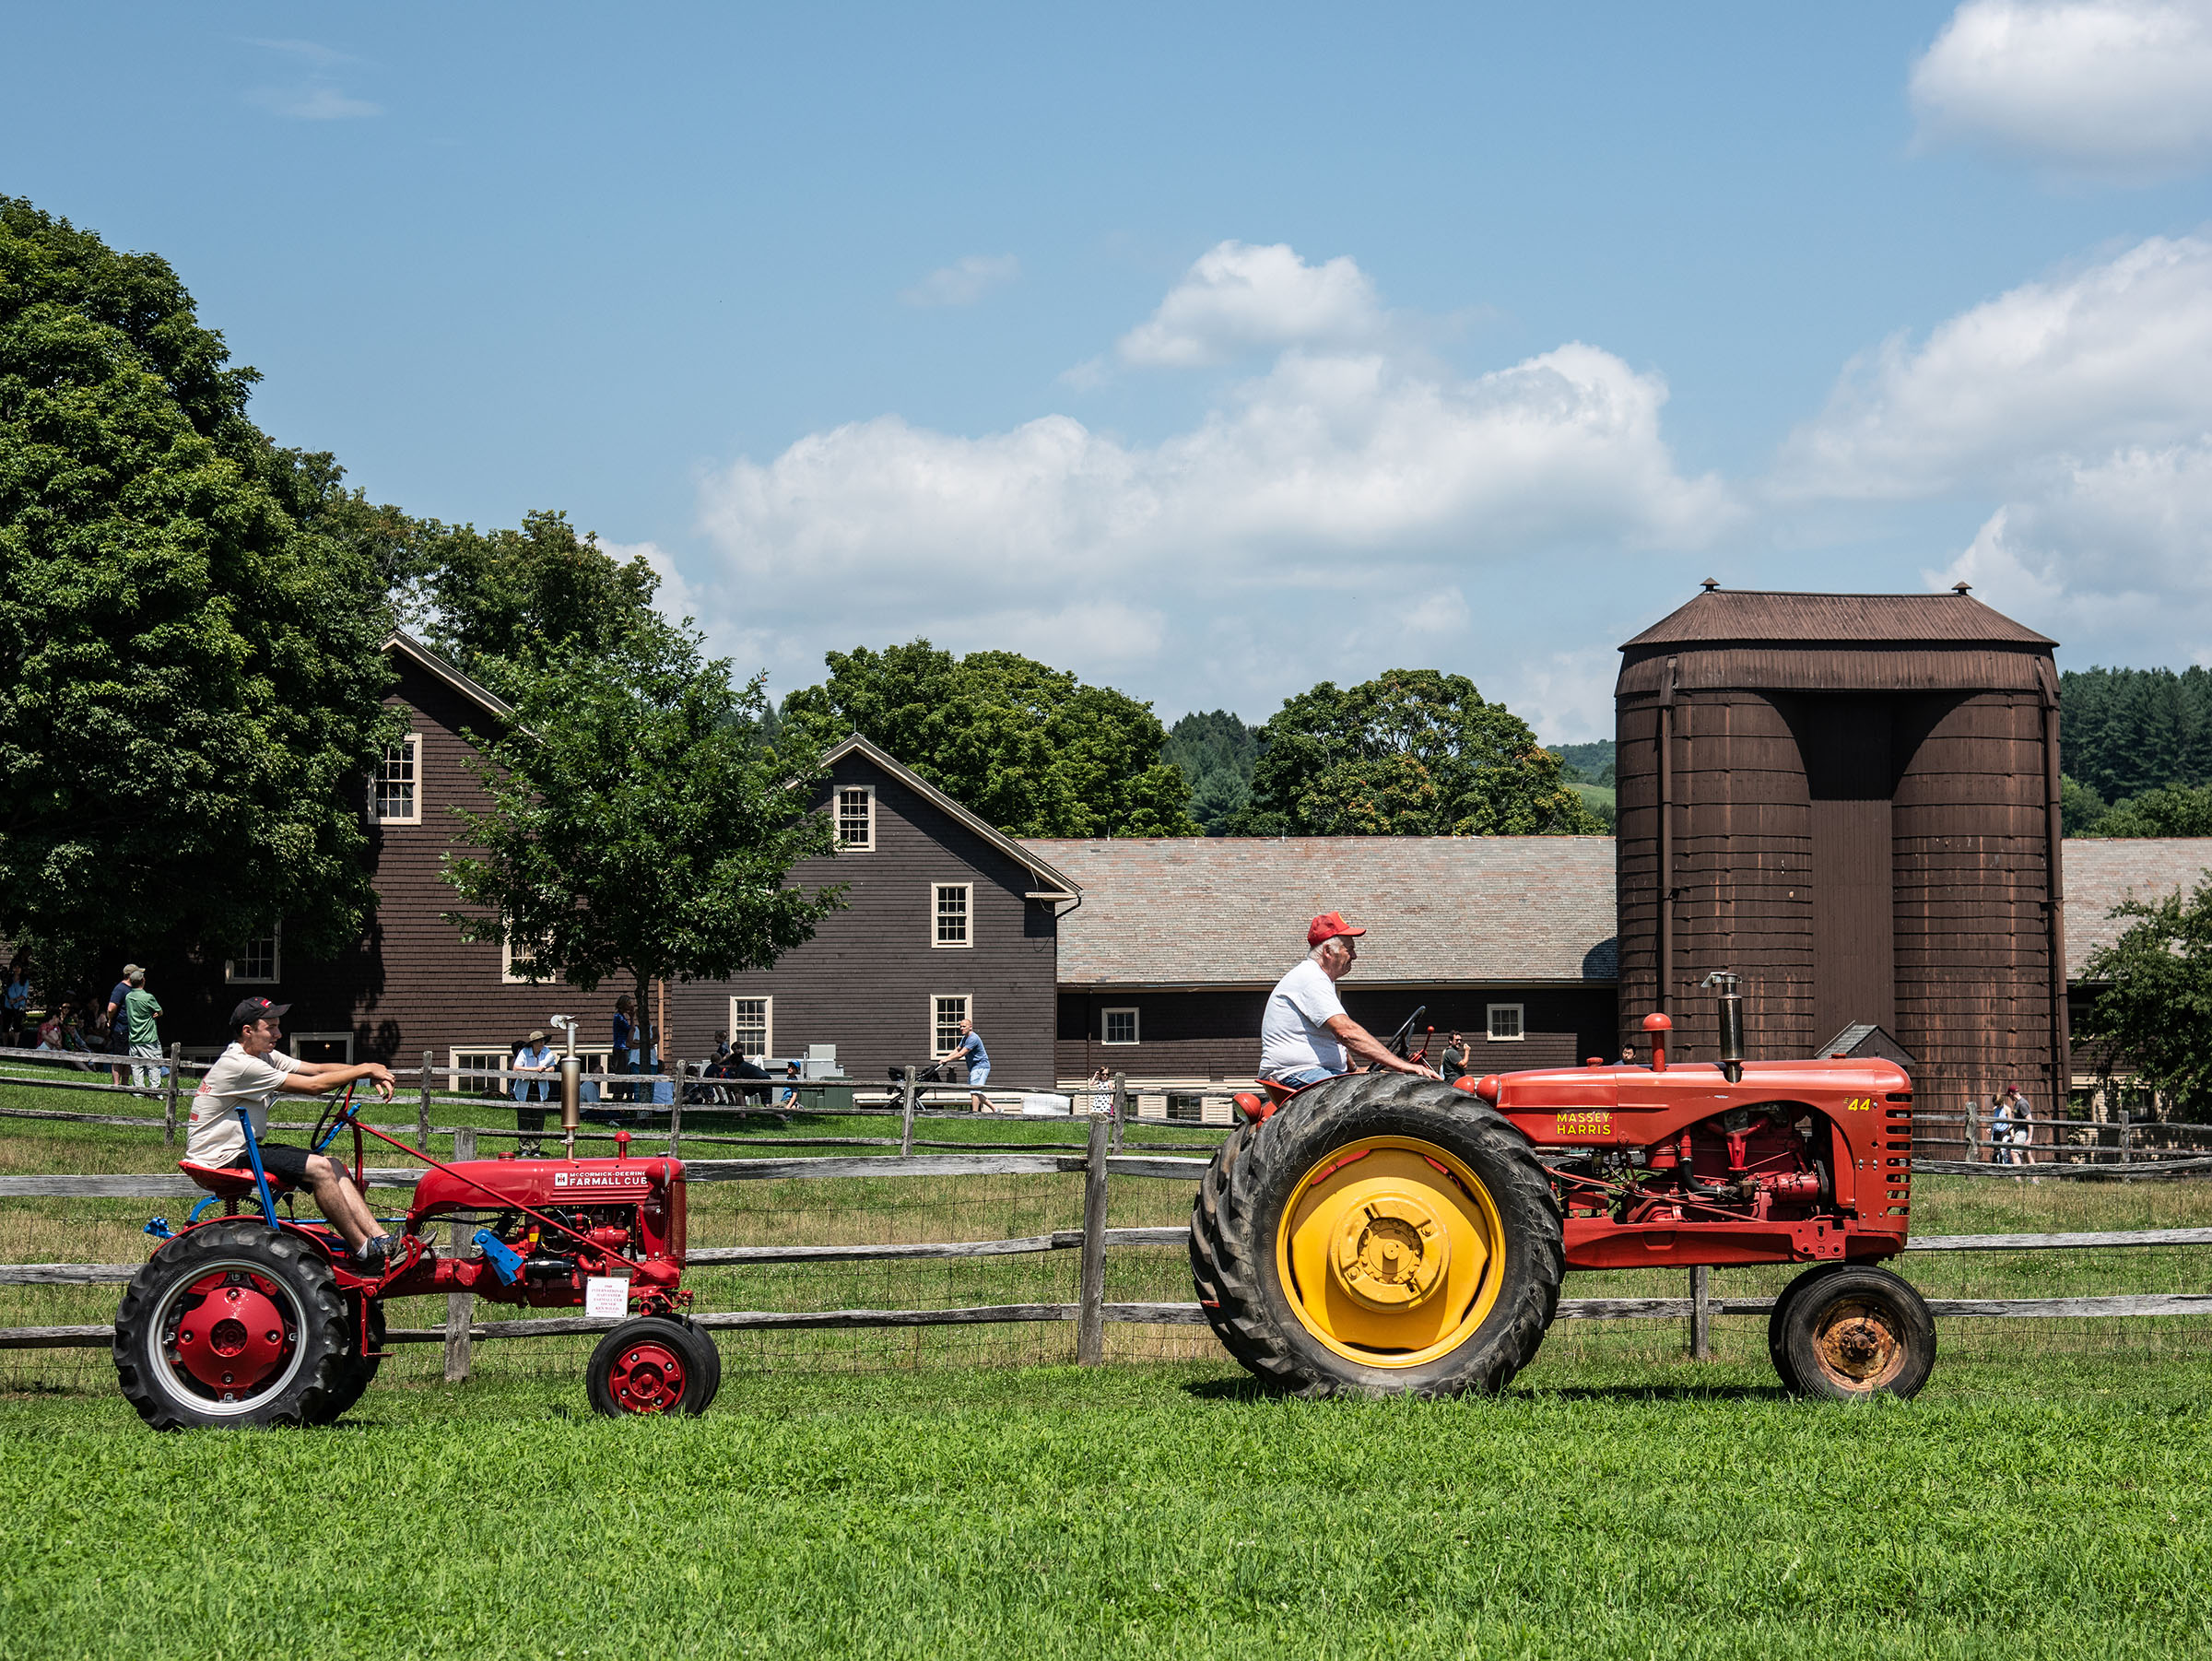 Billings Farm & Museum’s Antique Tractor Day Sunday, August 1, 2021